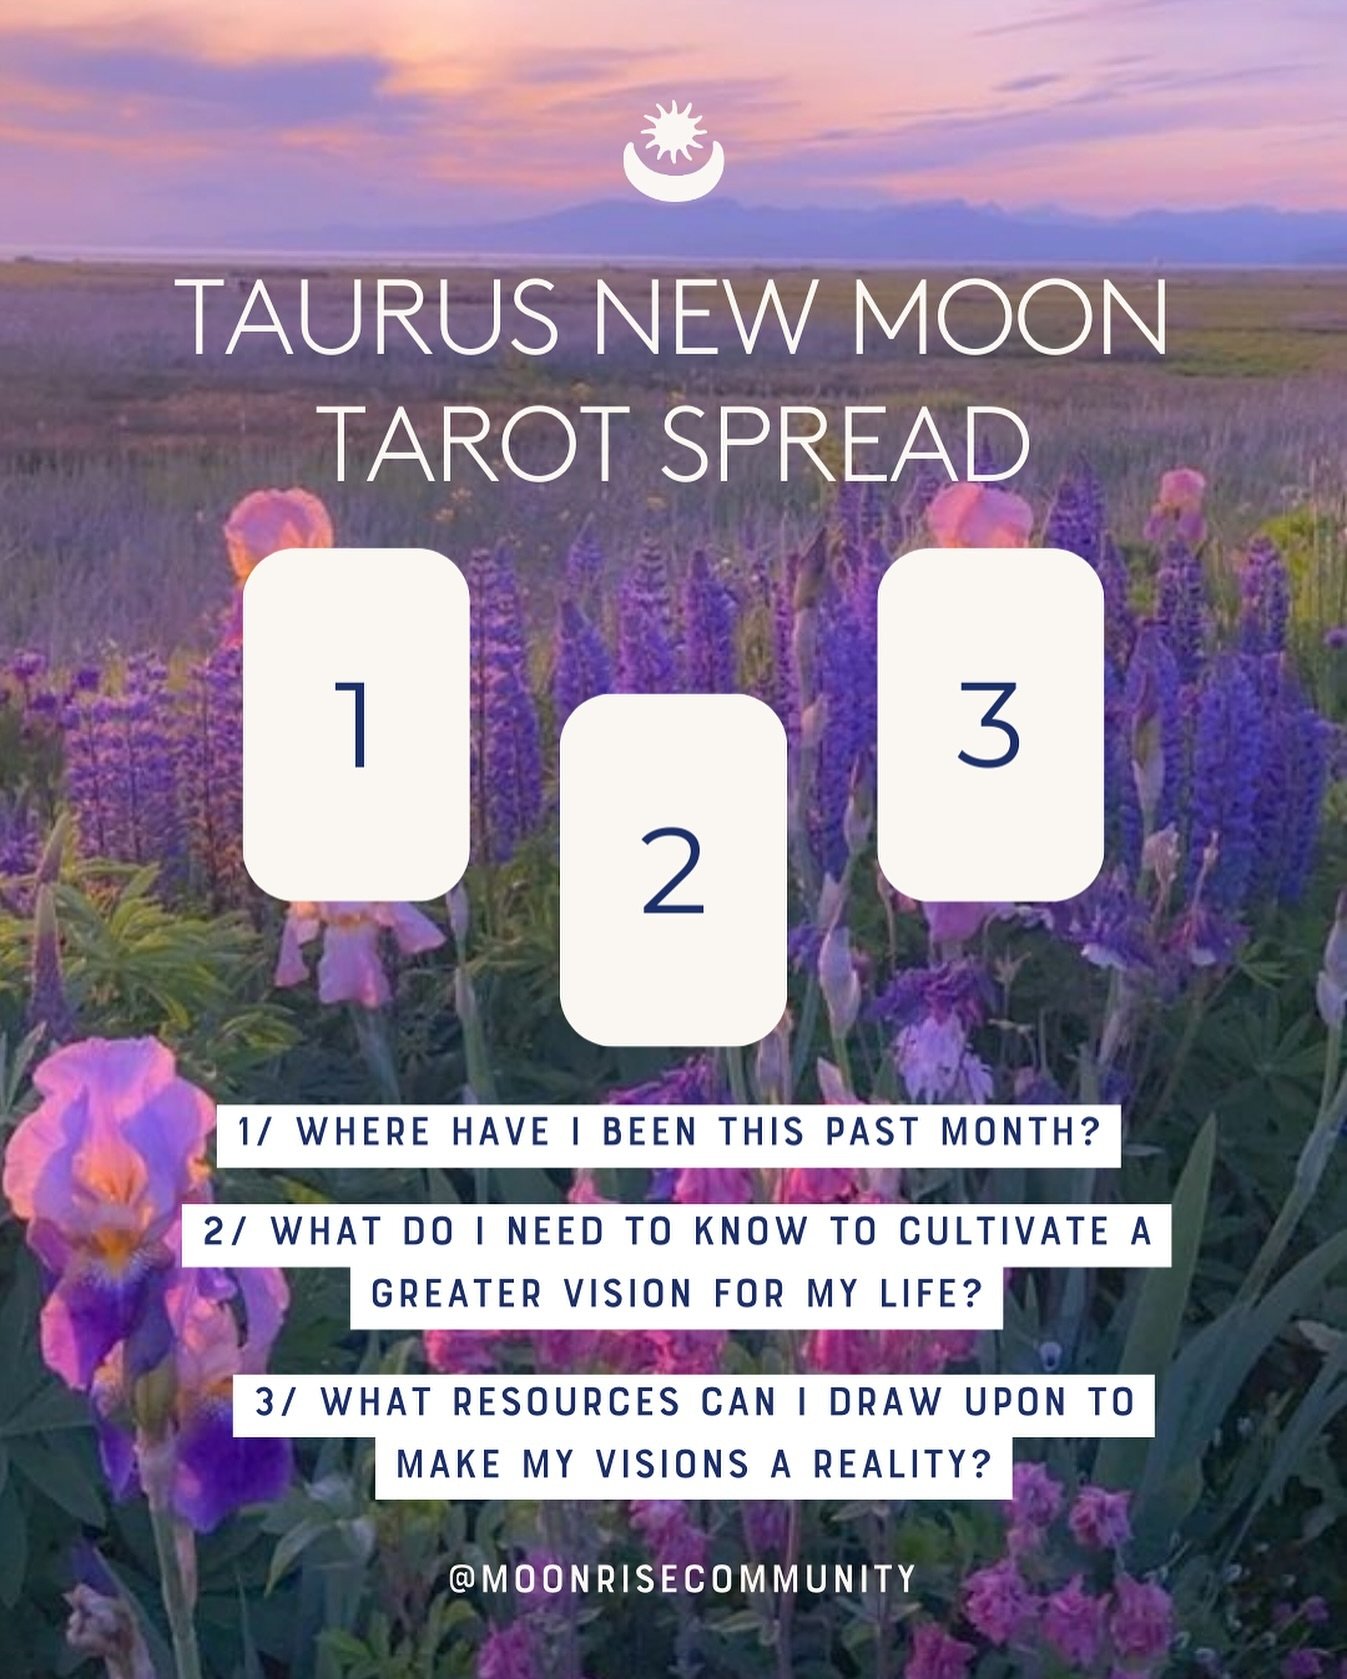 Today is the Taurus New Moon. A gorgeous moment to pause, tune inward, and contemplate the next step in your life path.

&ldquo;If you can dream it, devote yourself to it, and embody the grace of it already being so, so it will be.&rdquo;

This is yo